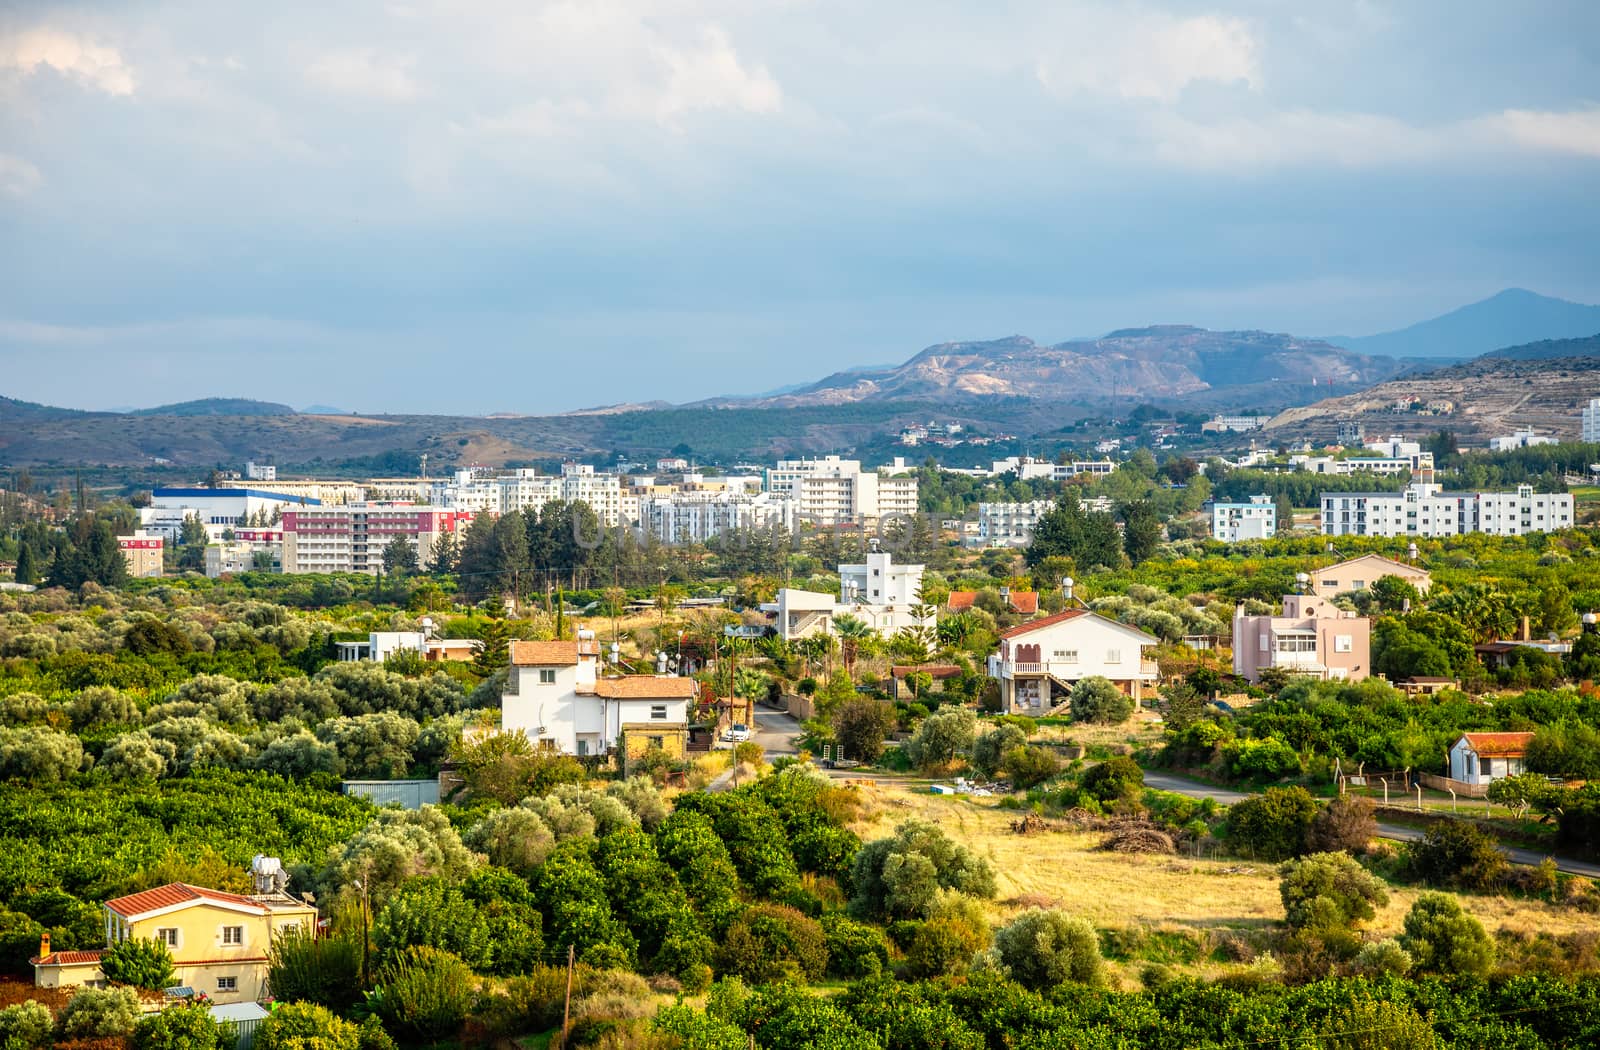 Lefka city center with modern buildings and green residential suburbs, Northern Cyprus